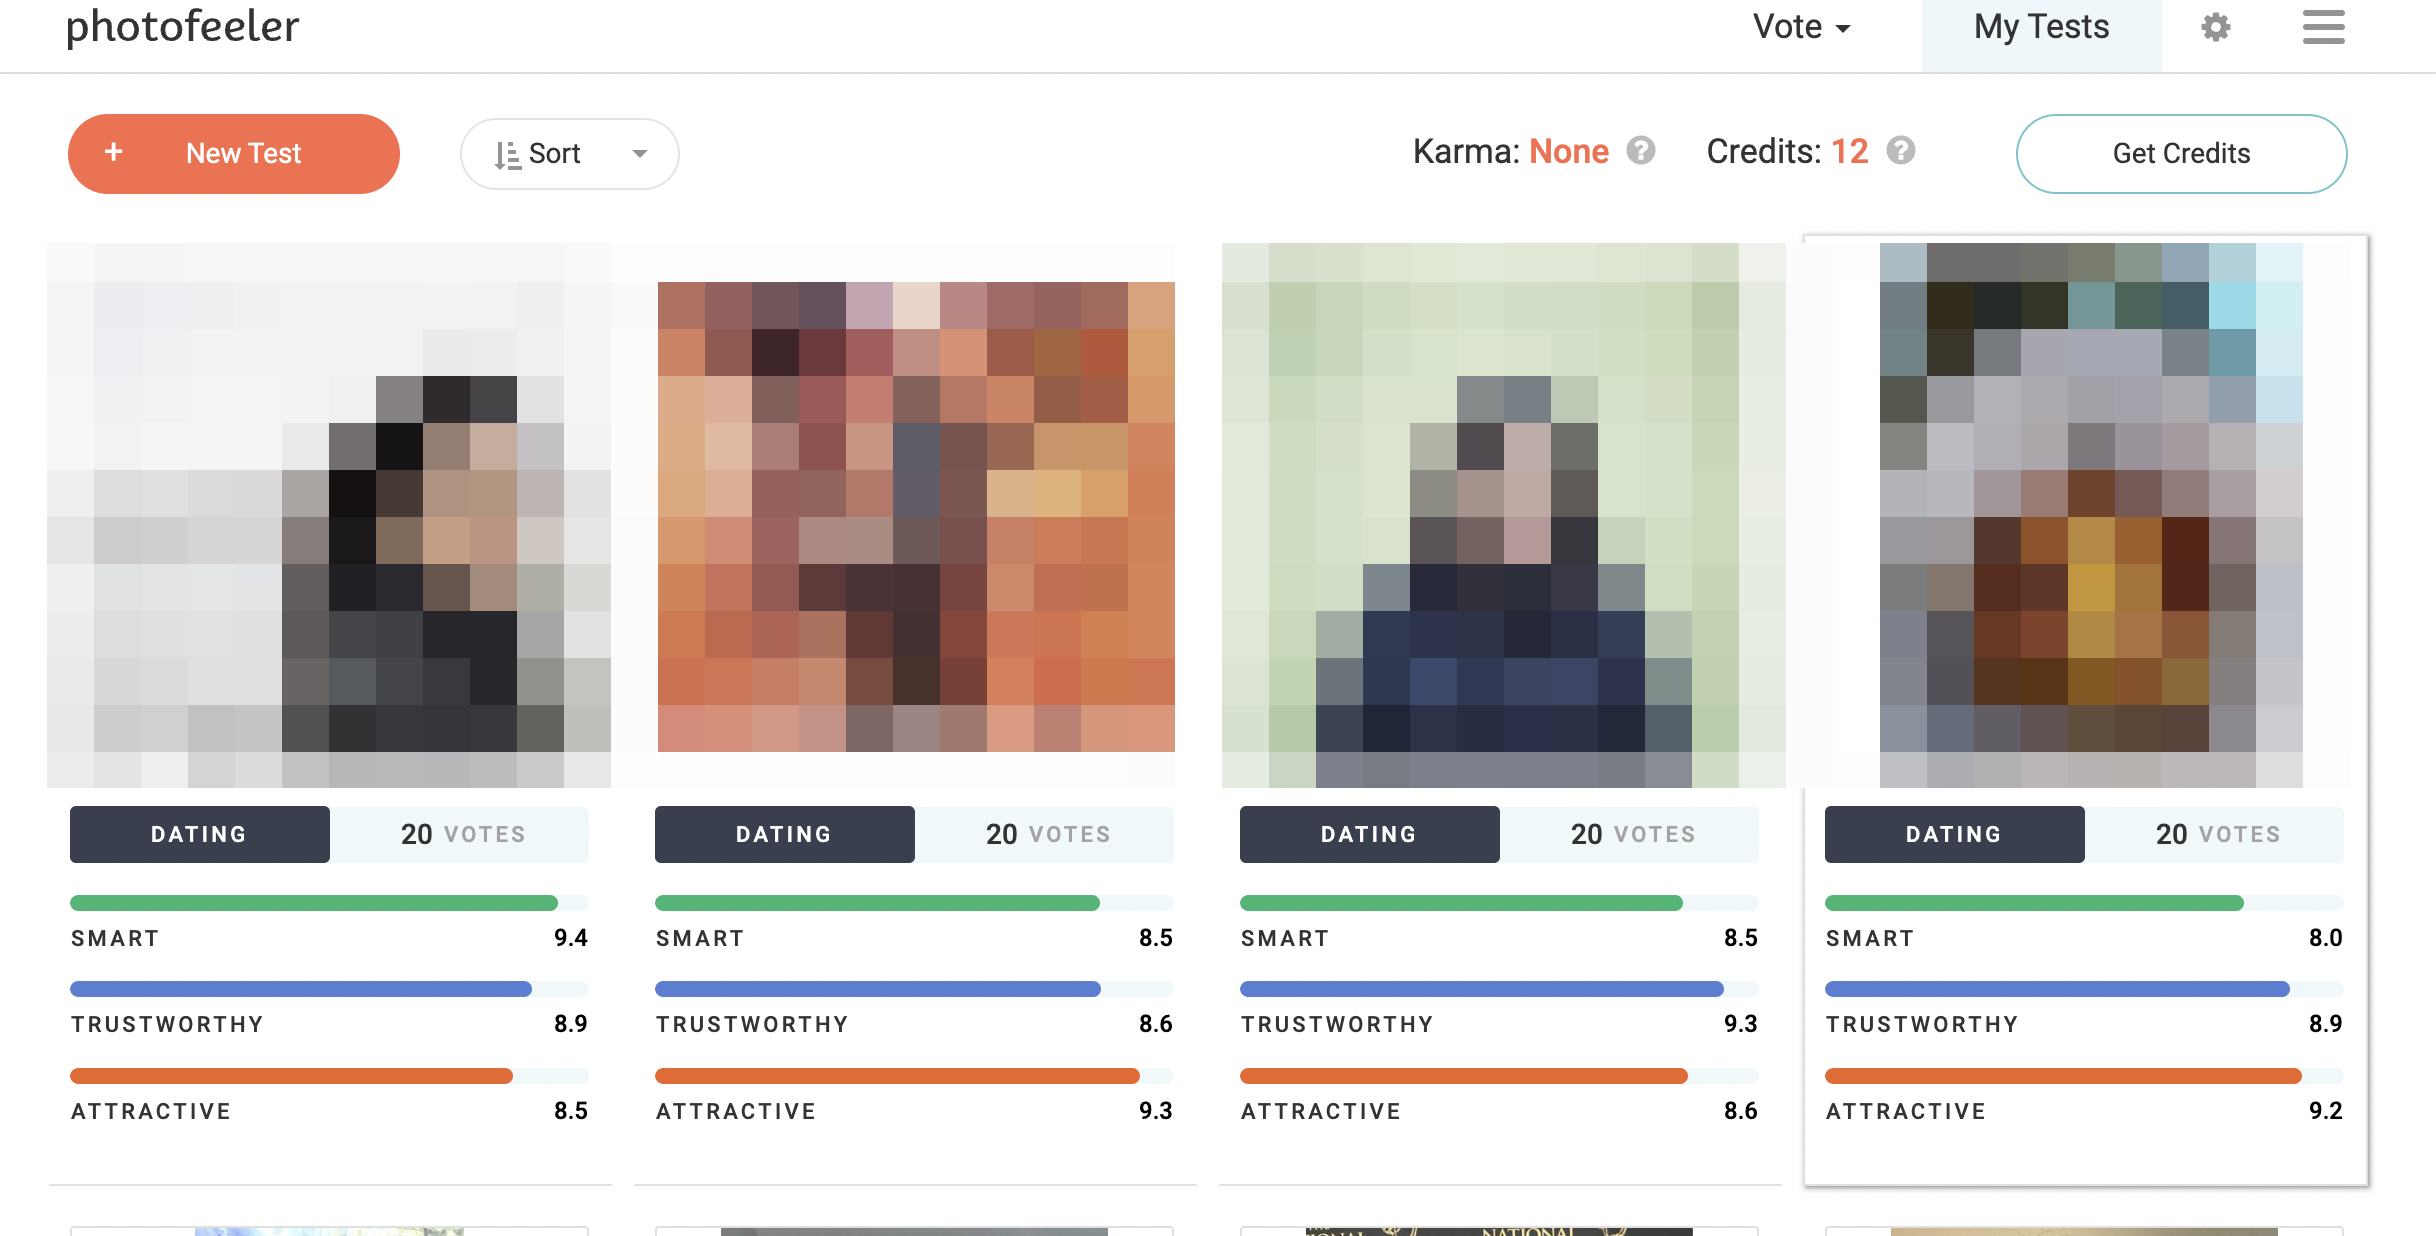 Ratings for four different photos on Photofeeler.